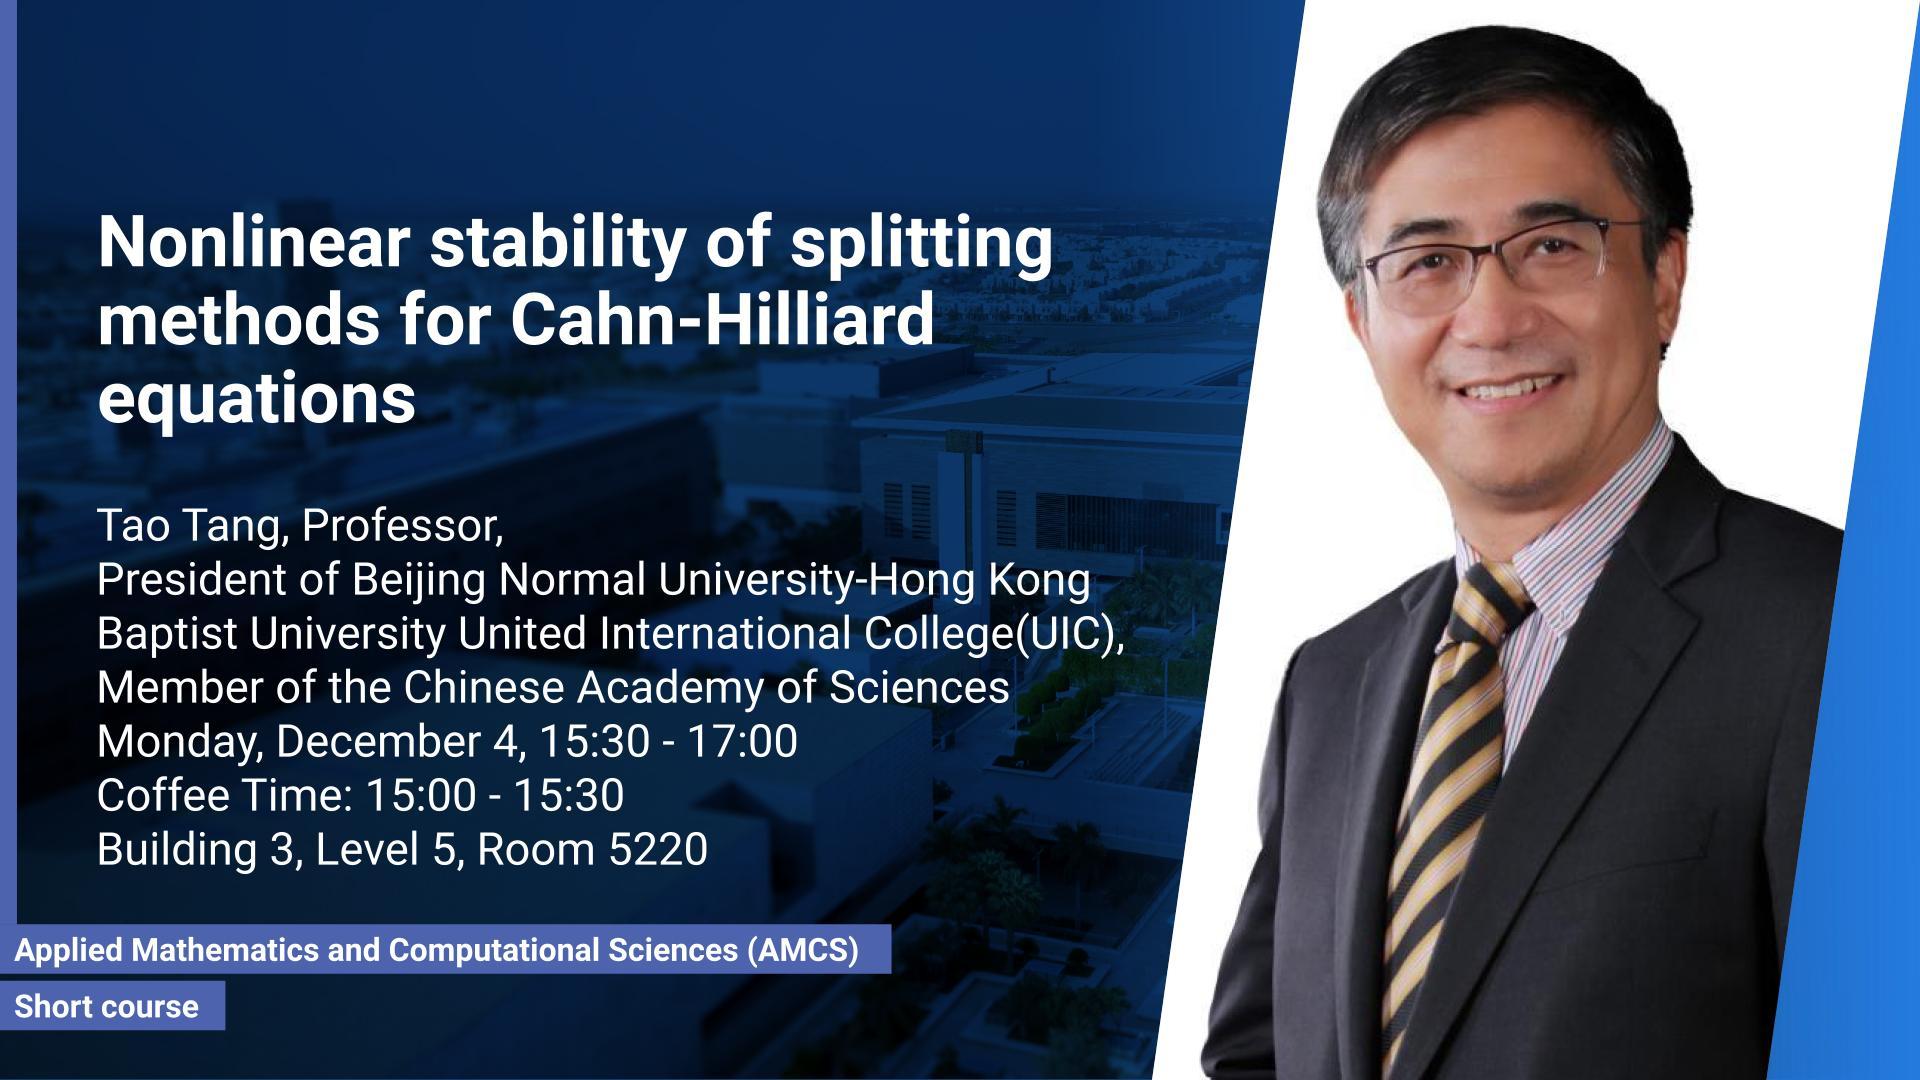 KAUST-CEMSE-AMCS-Shot-couse-Nonlinear-stability-of-splitting-methods-for-Cahn-Hilliard-equations